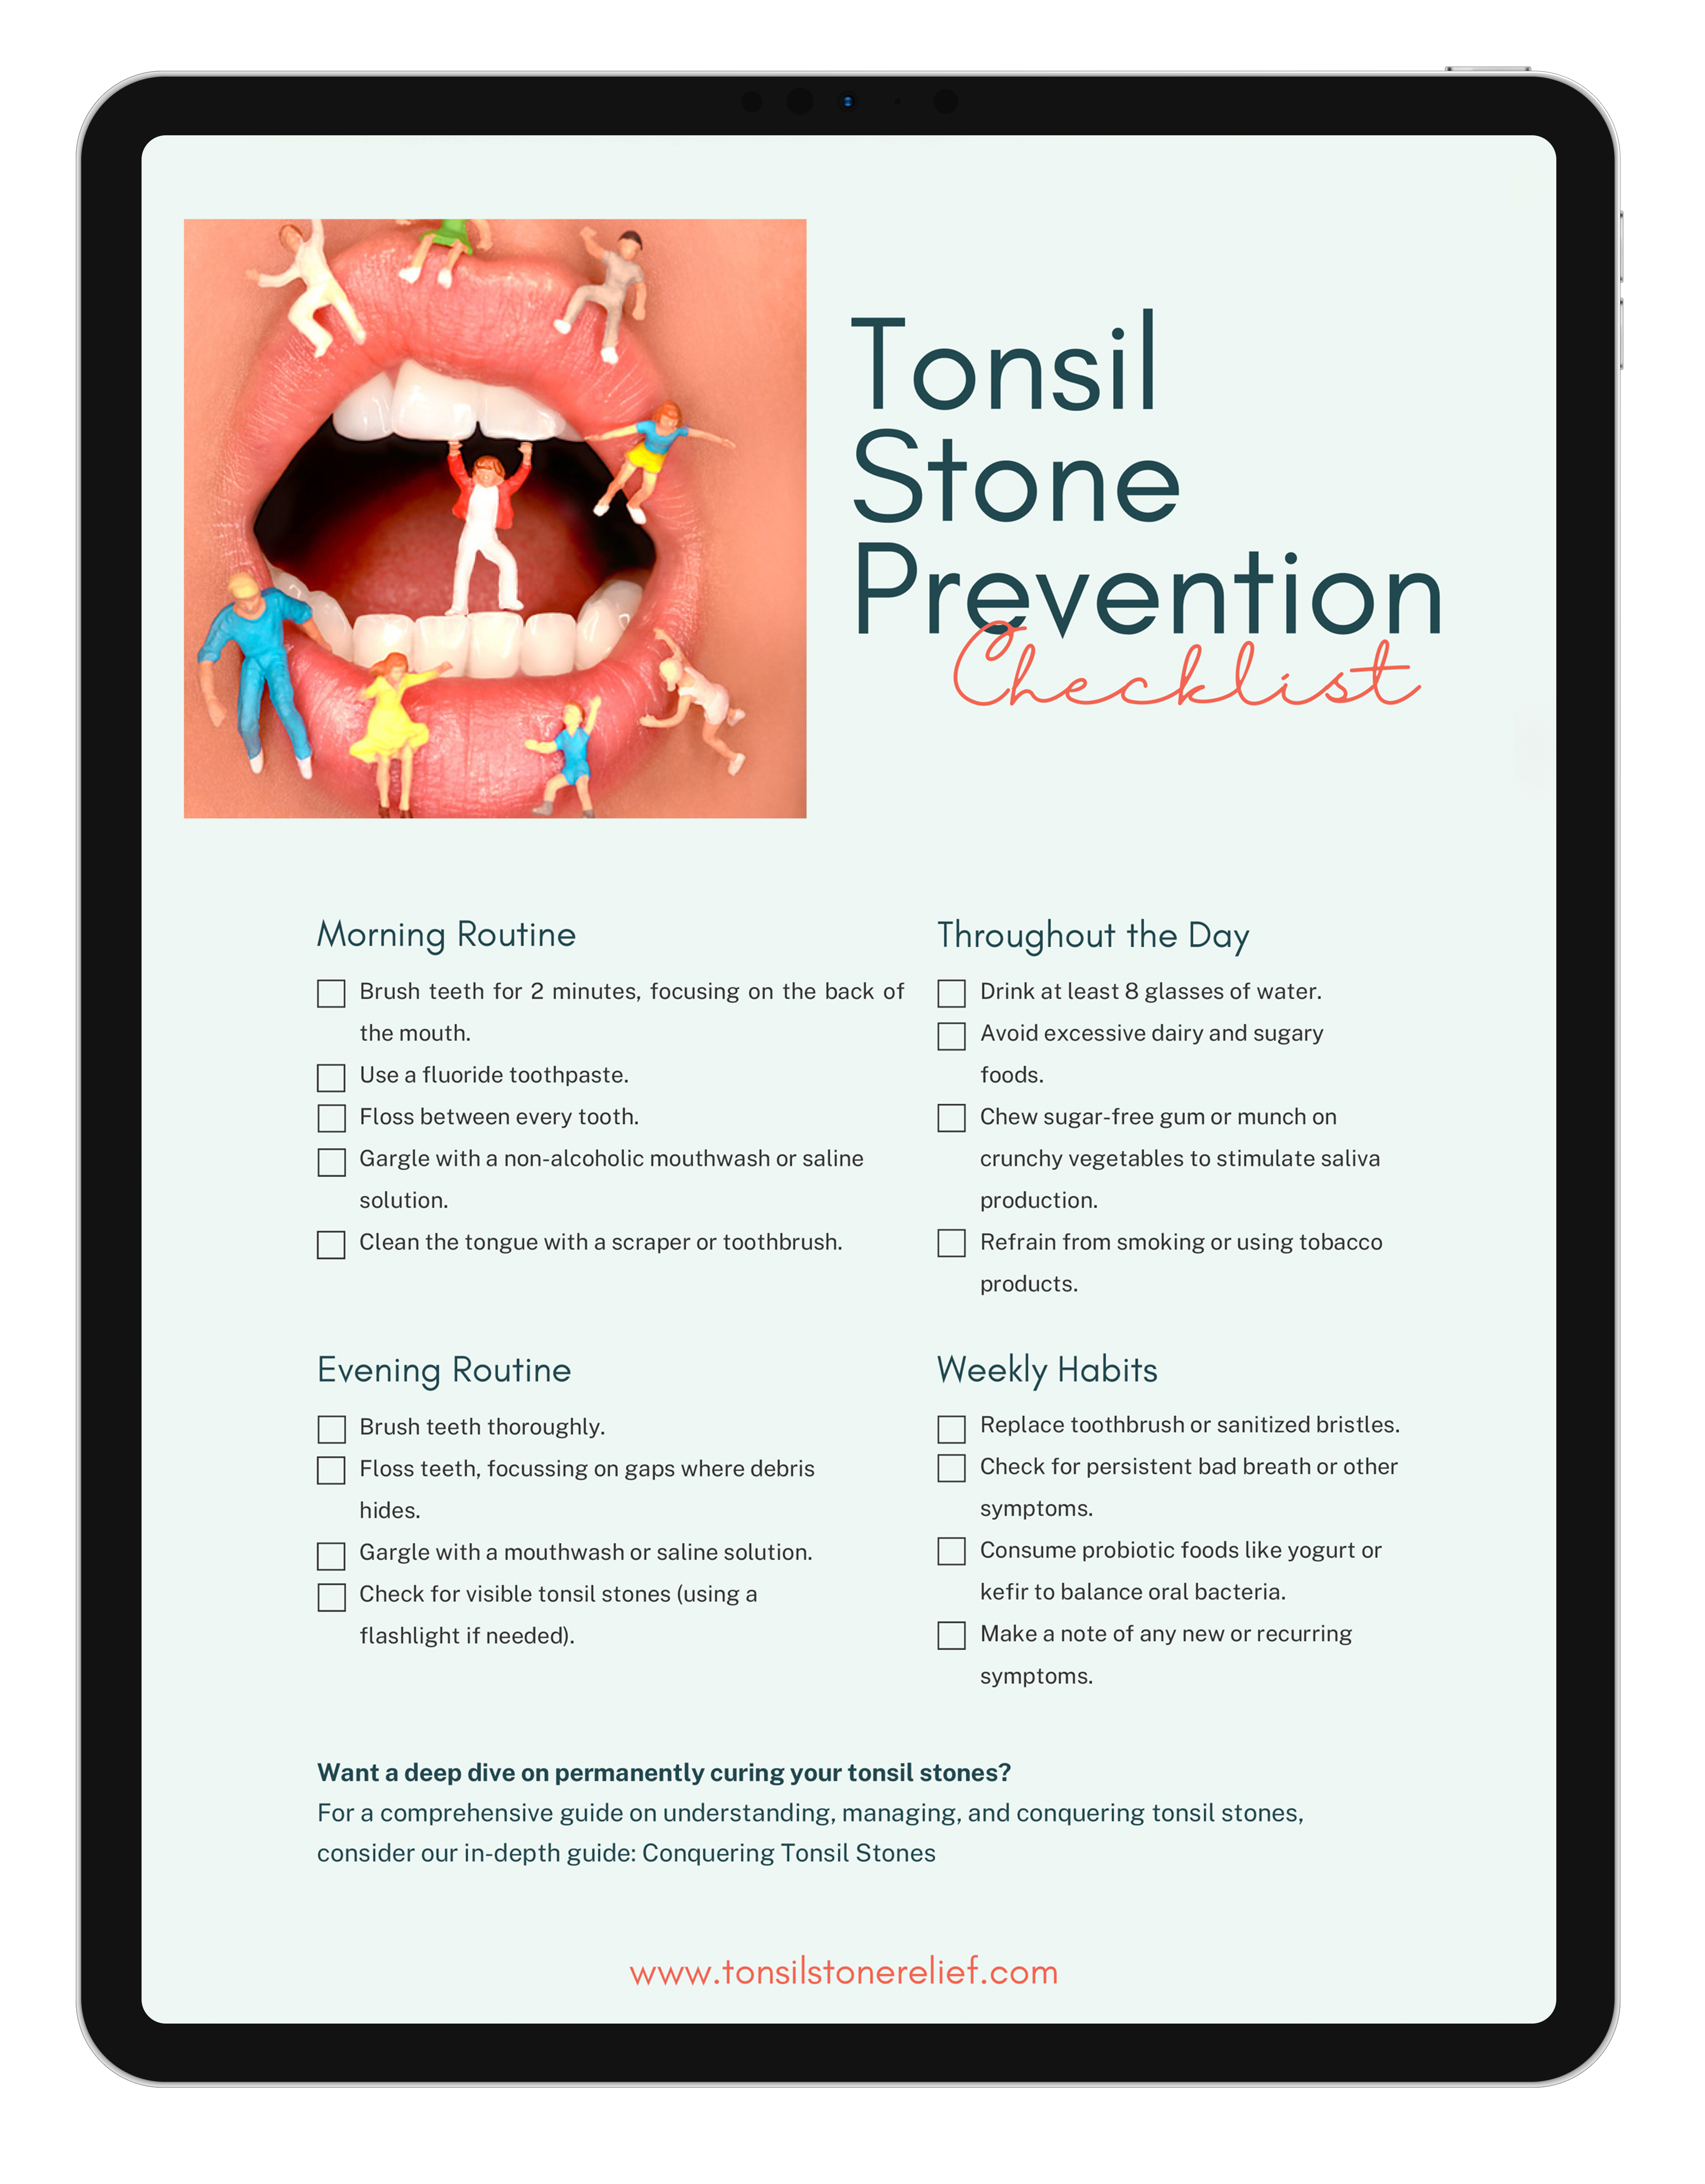 Digital tablet displaying 'Tonsil Stone Prevention Checklist' with daily routines and weekly habits for oral hygiene on a backdrop of an open mouth with miniature figures demonstrating the steps.